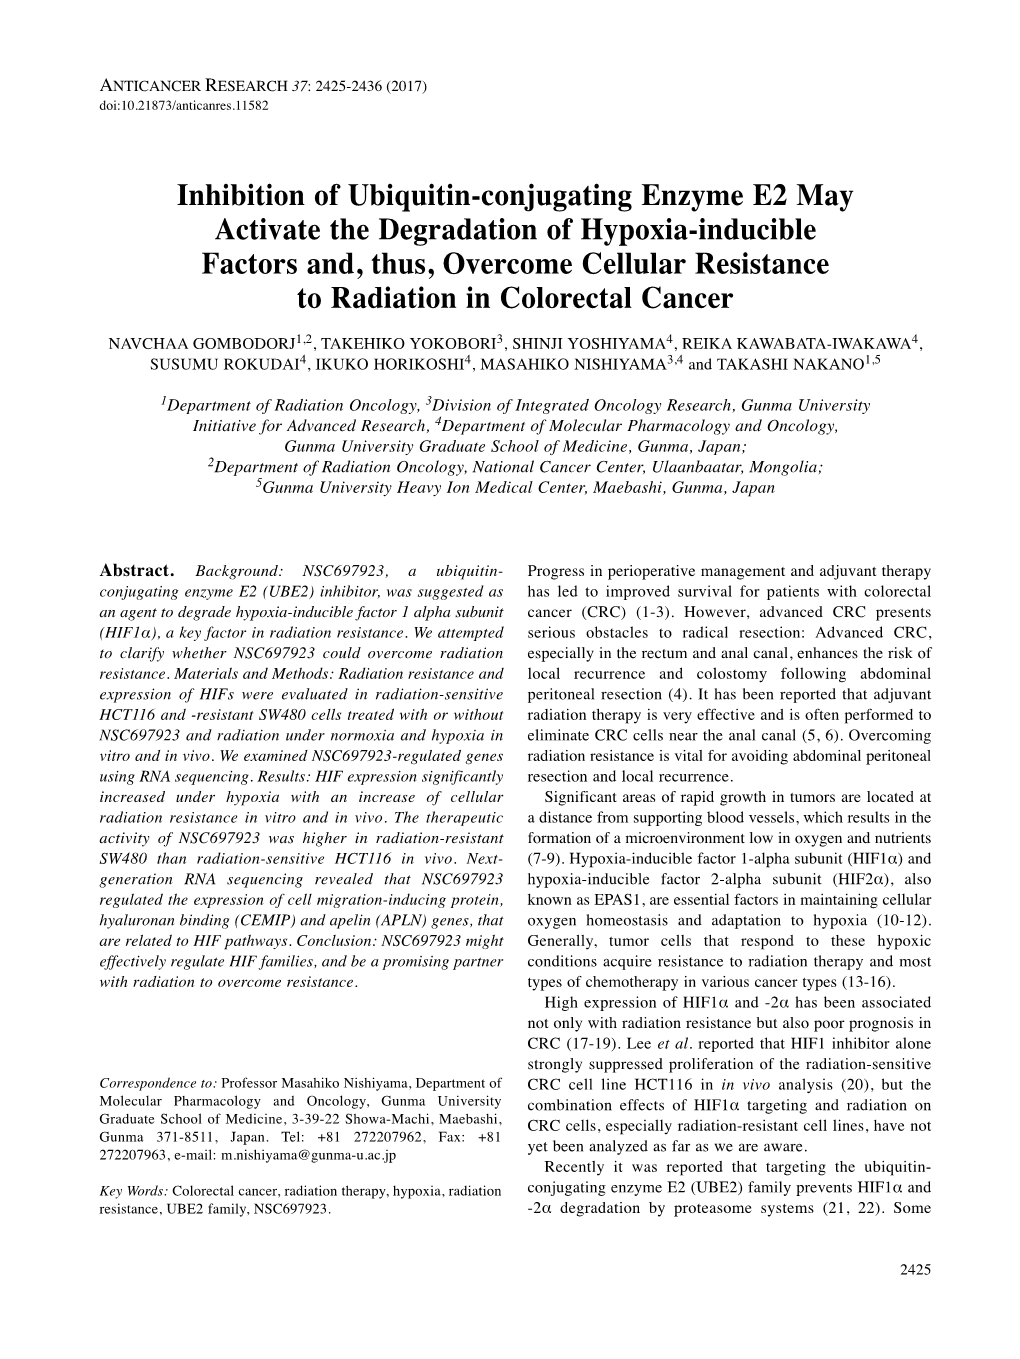 Inhibition of Ubiquitin-Conjugating Enzyme E2 May Activate The